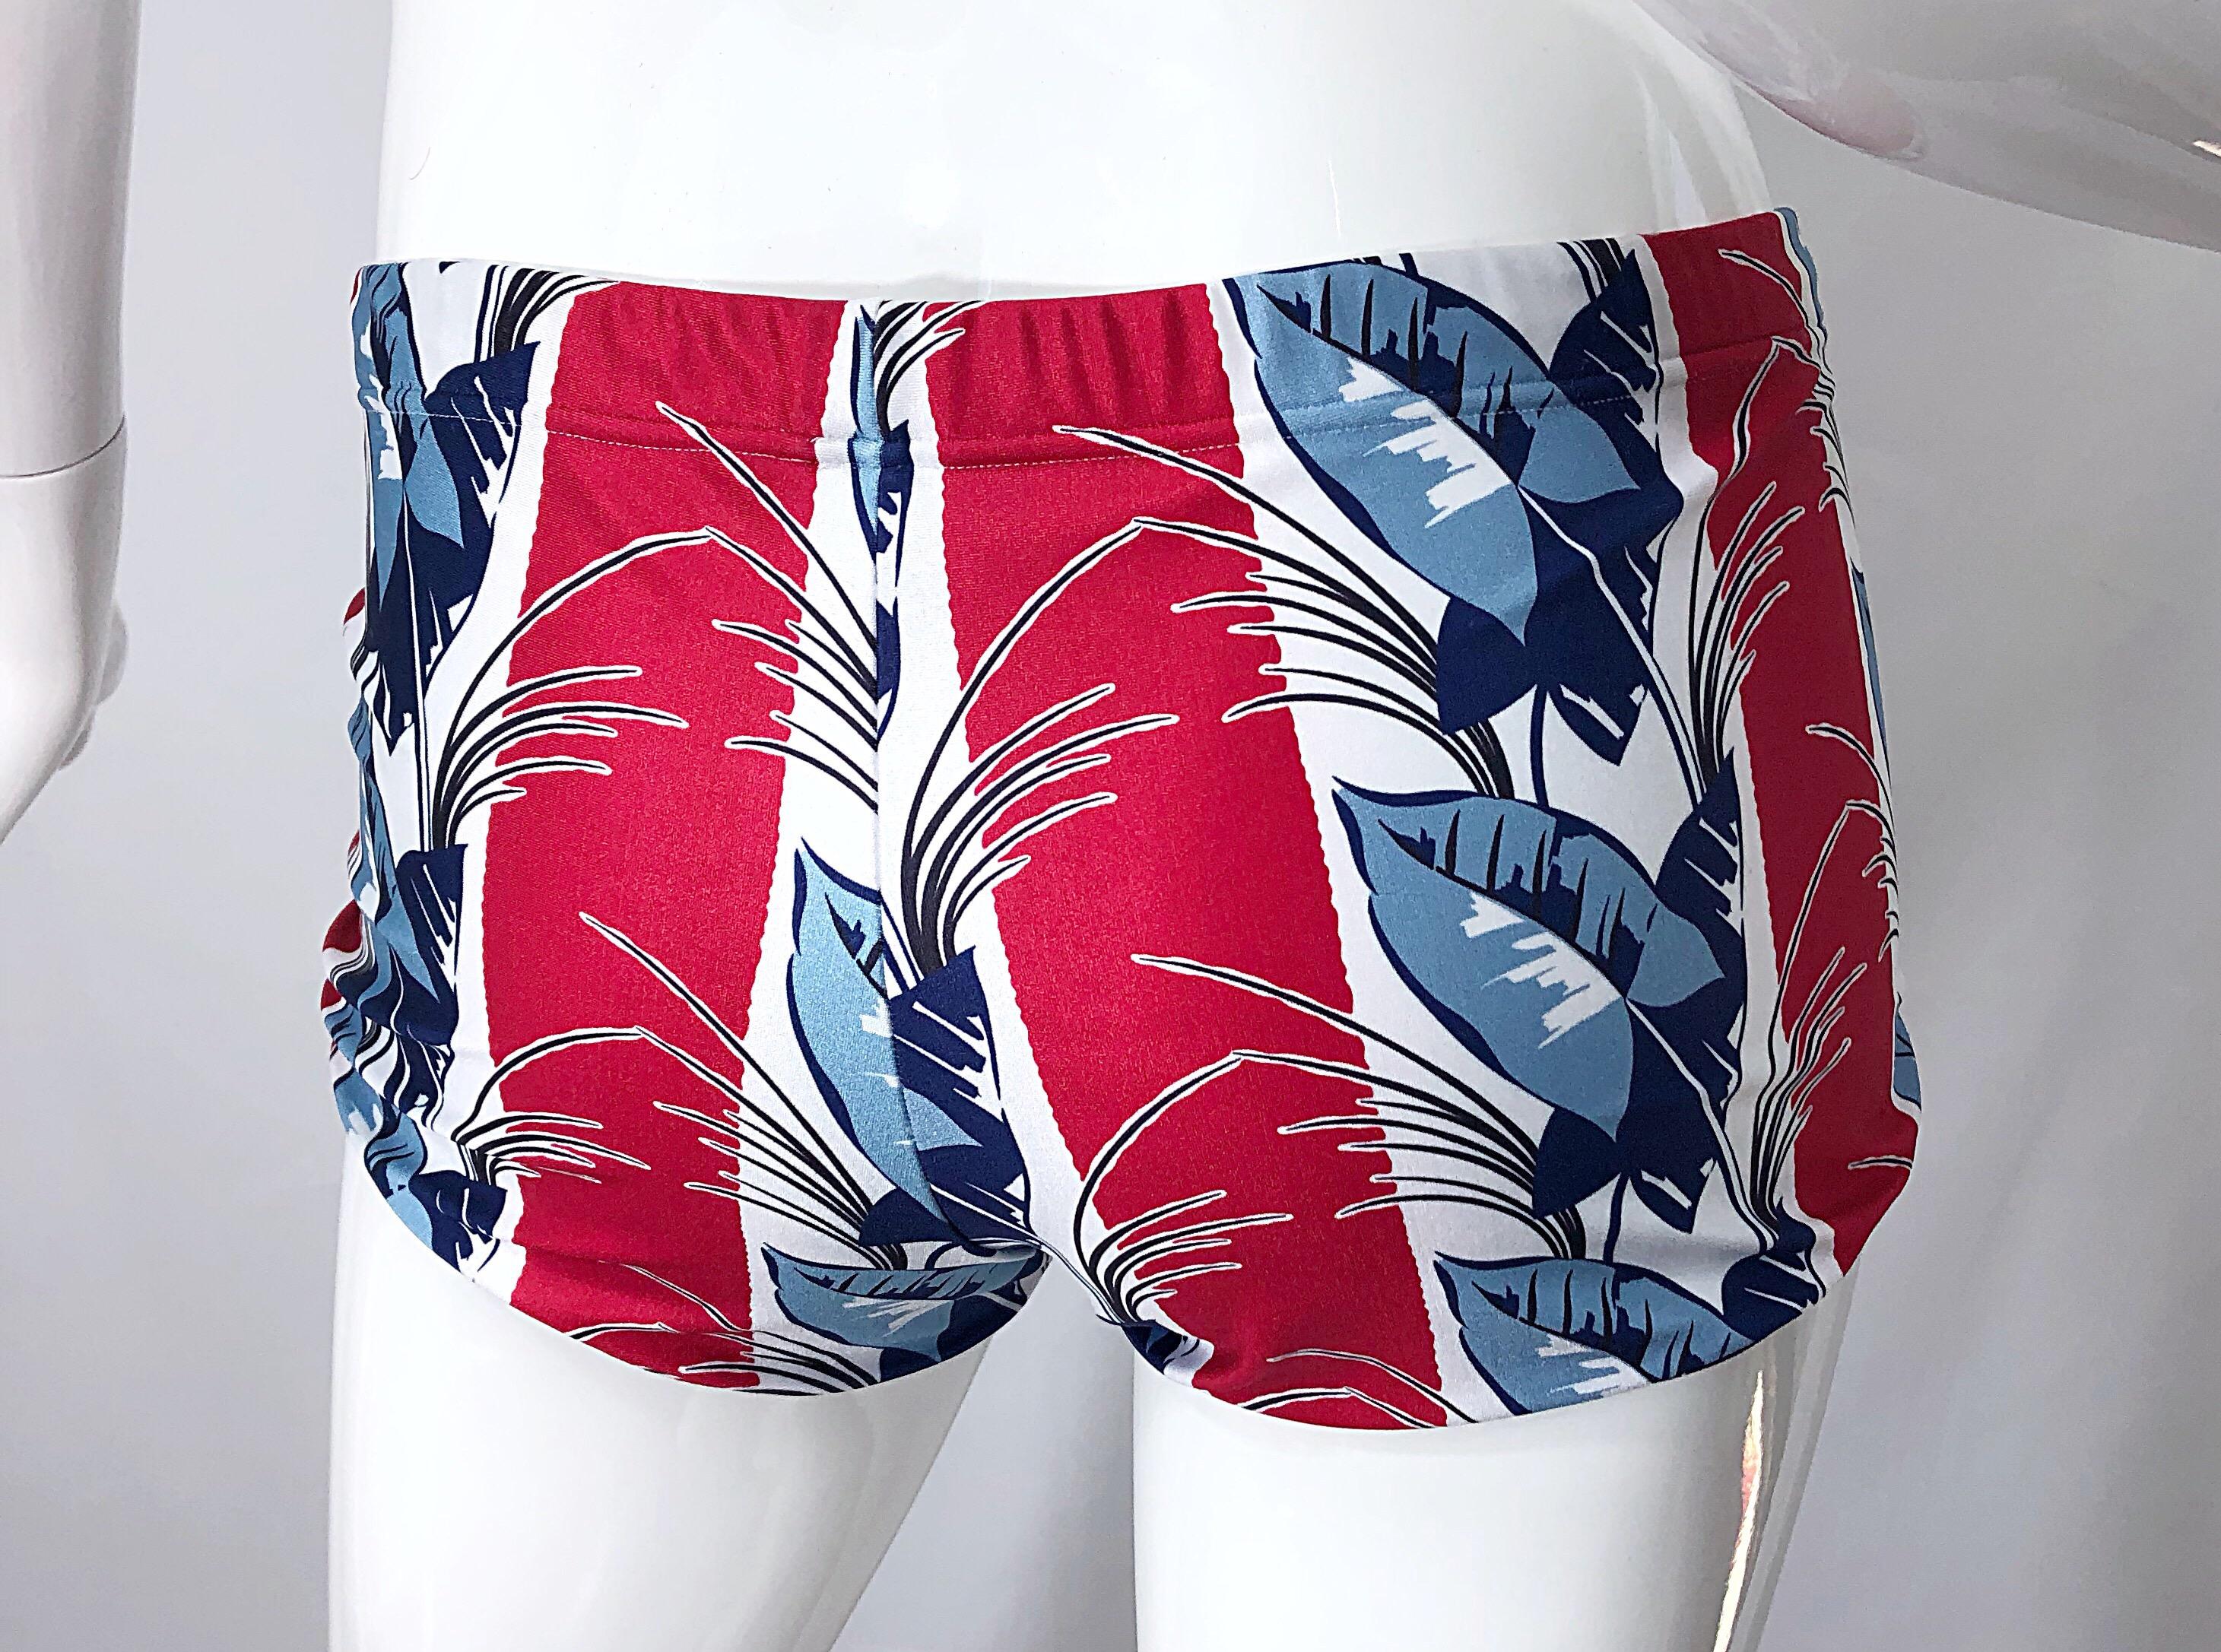 Valentino New 2000s Women's Red, White and Blue Boy Shorts Swimsuit Bottoms For Sale 3